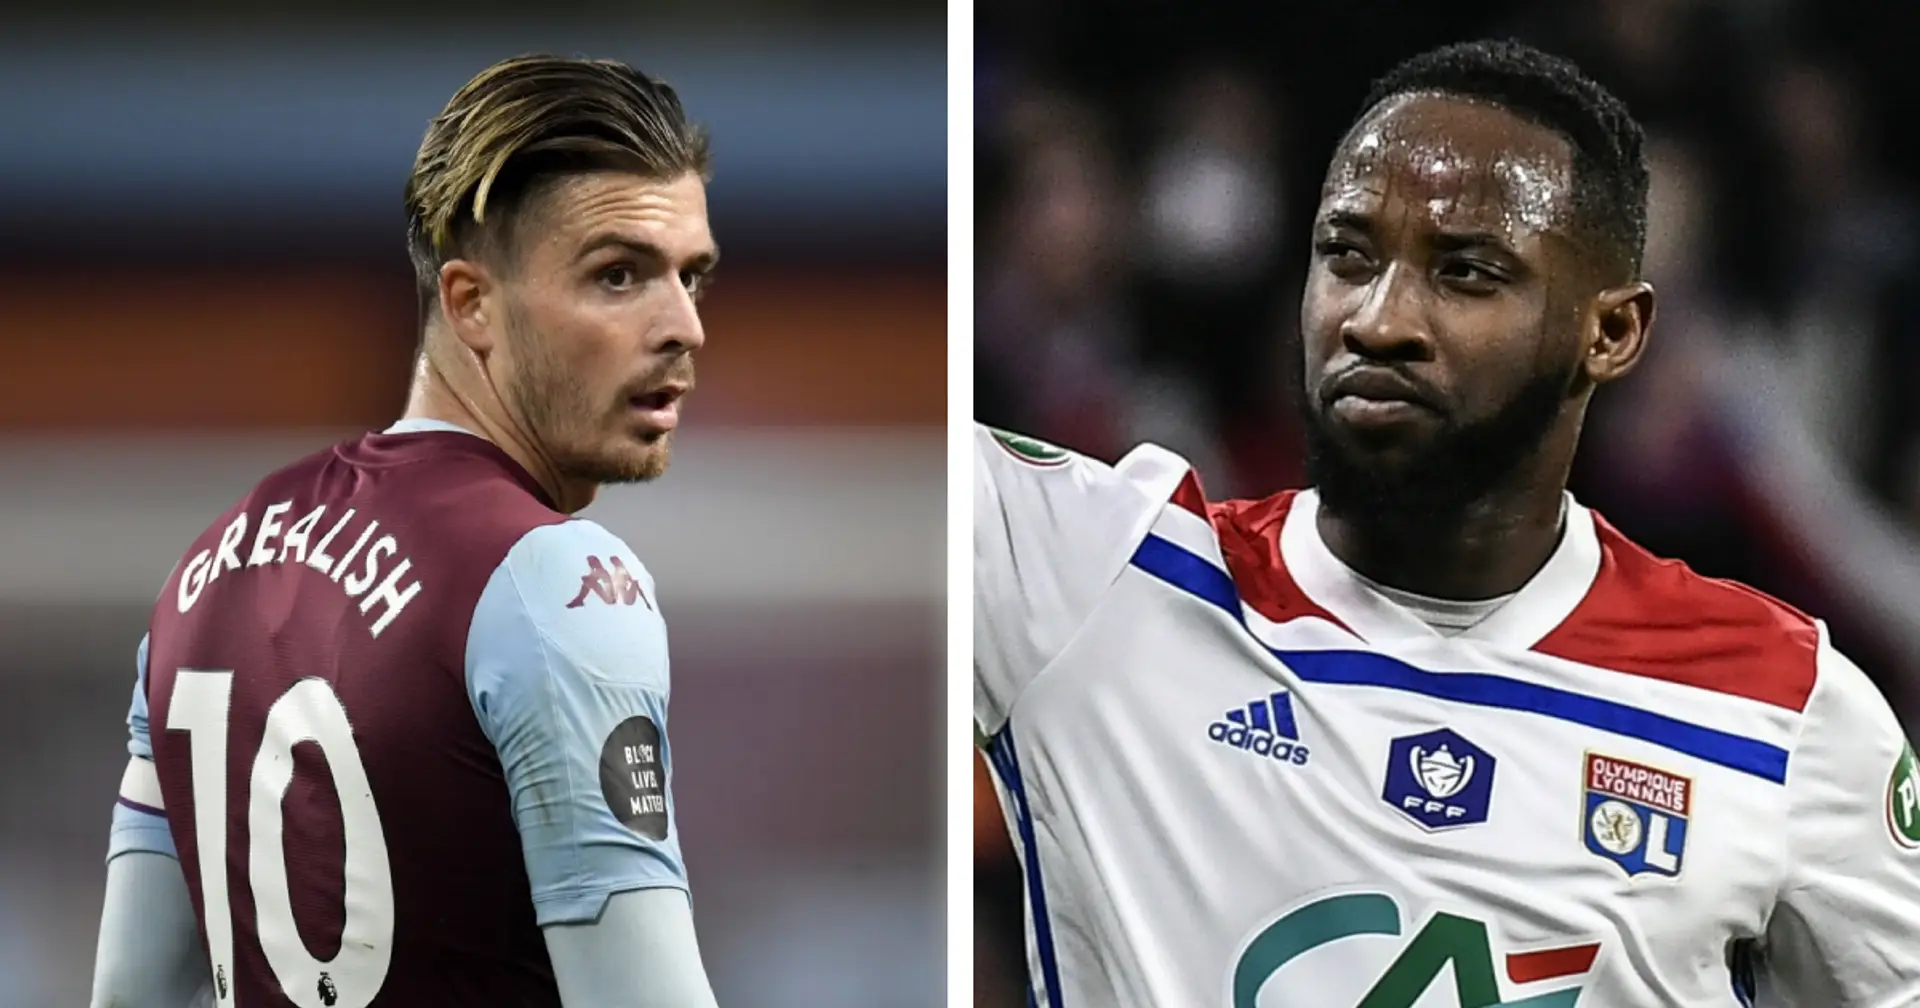 Jack Grealish, Moussa Dembele or someone else? Bookies name Man United's most likely signing